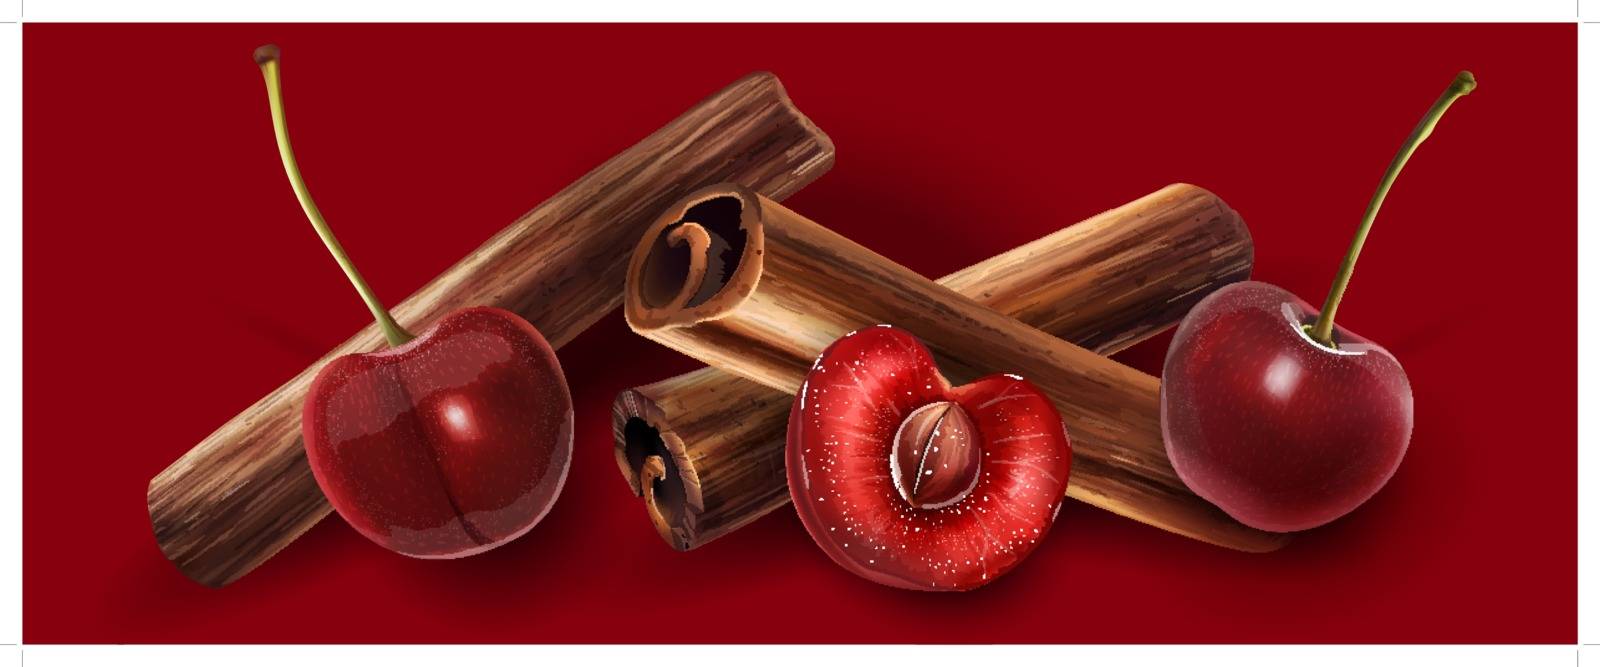 Cinnamon and cherry on a dark red background.